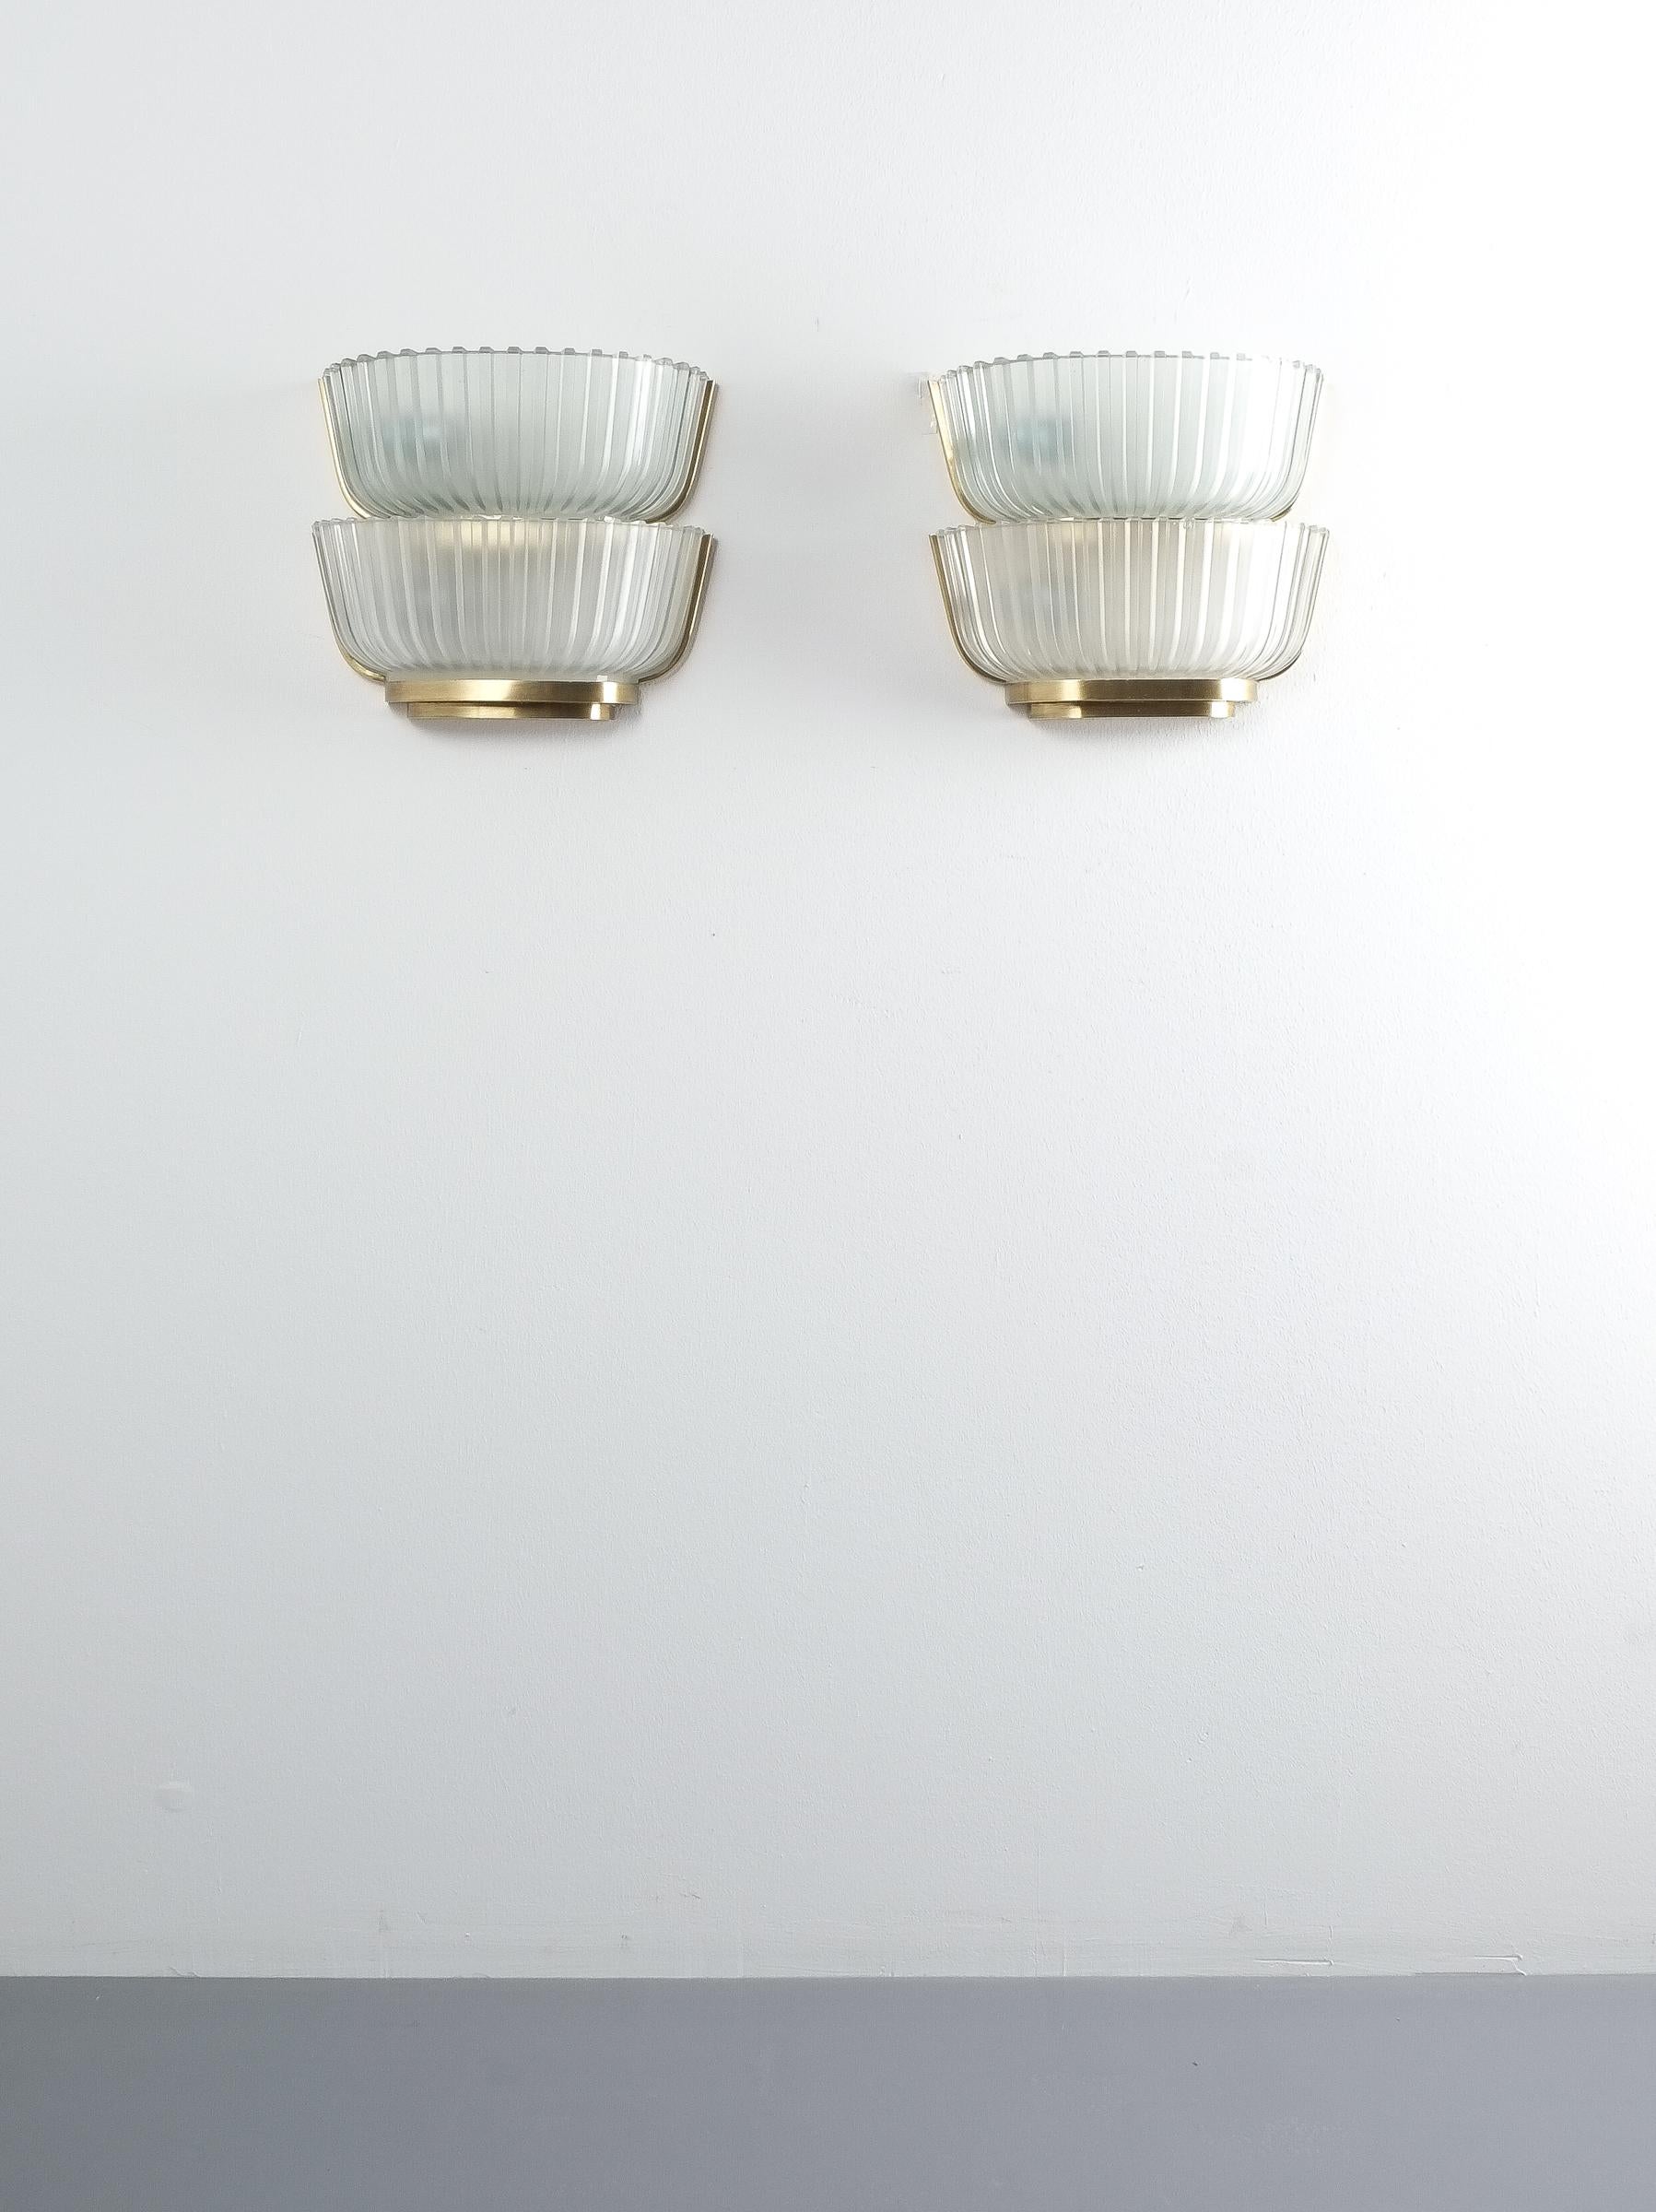 Pair of Late Art Deco Glass and Brass Sconces Refurbished, Italy, circa 1940 For Sale 5